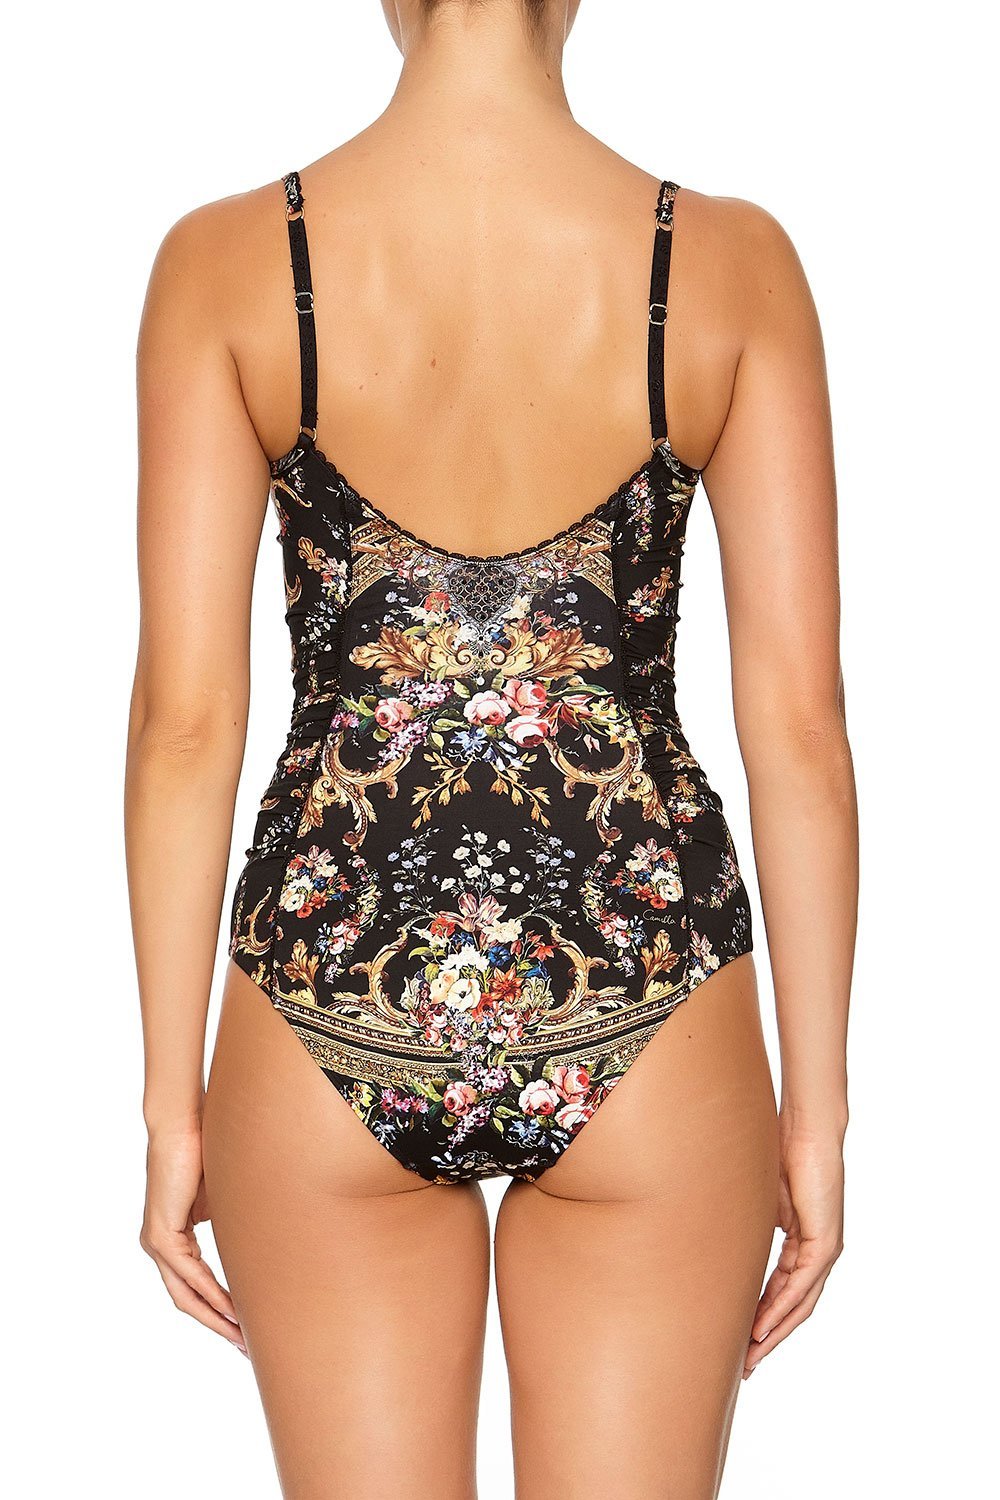 LACE TRIM PANELLED ONE PIECE FRIEND IN FLORA